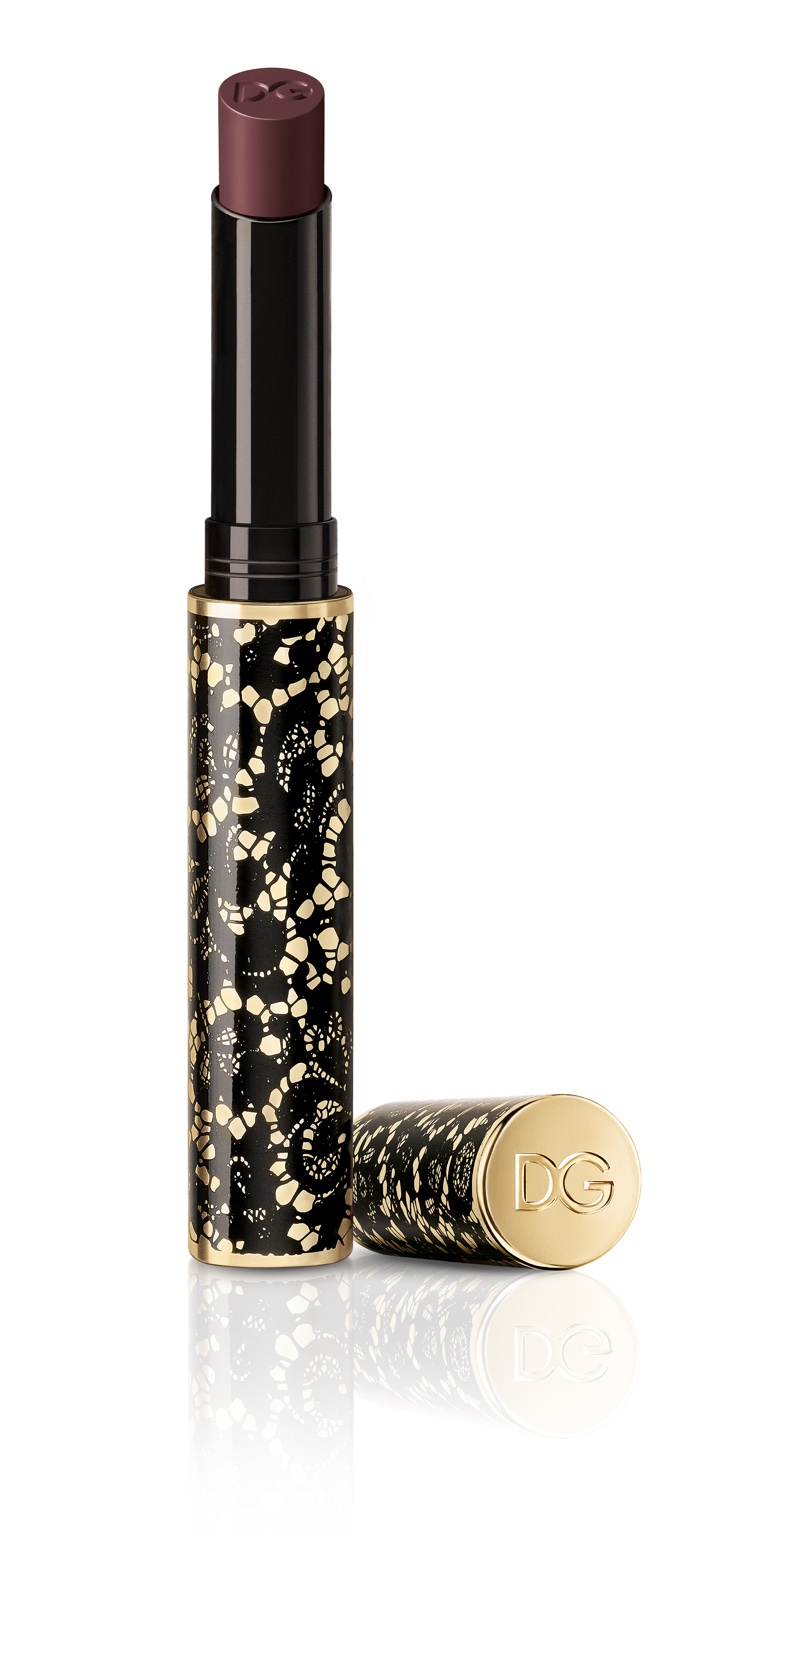 Dolce&Gabbana Beauty introduces Passionlips range to colour line-up 